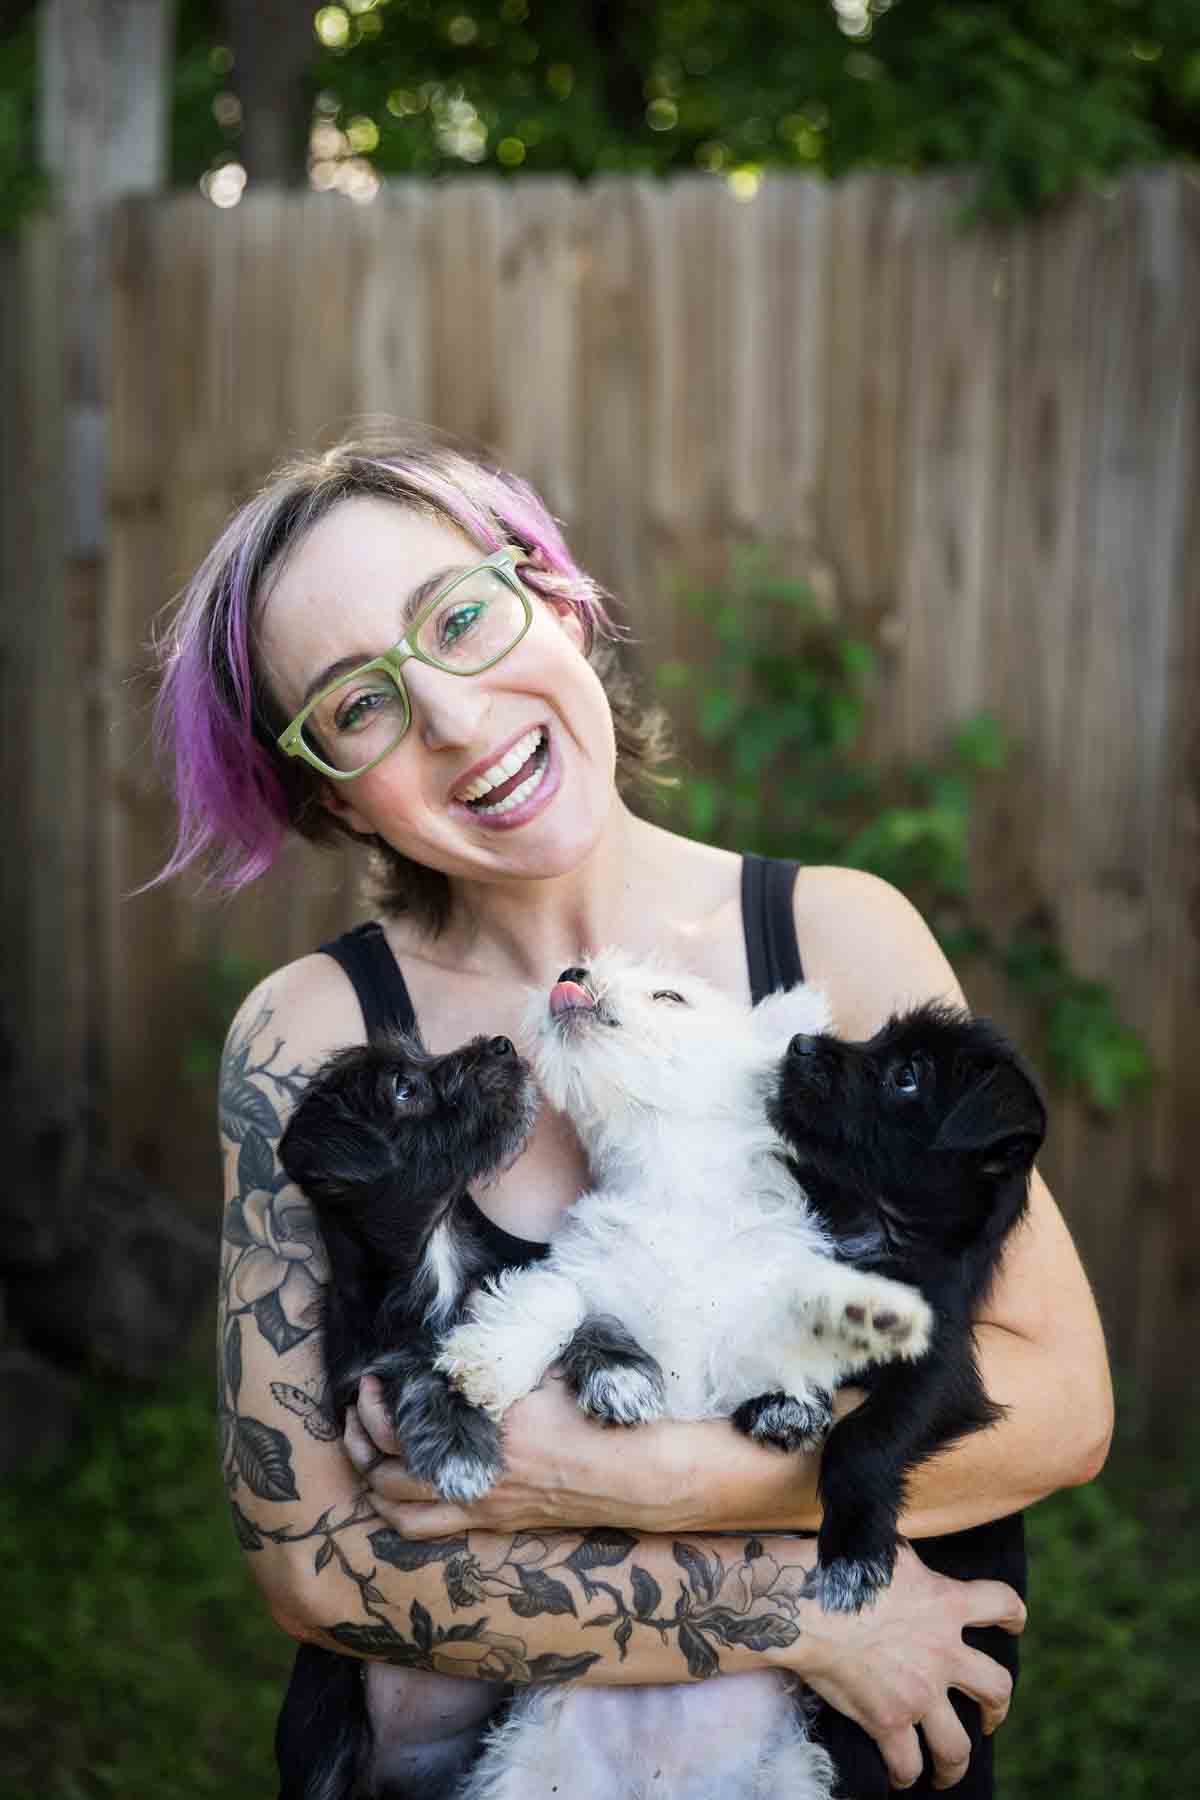 Woman with purple hair and glasses holding three puppies for an article on pet photo tips